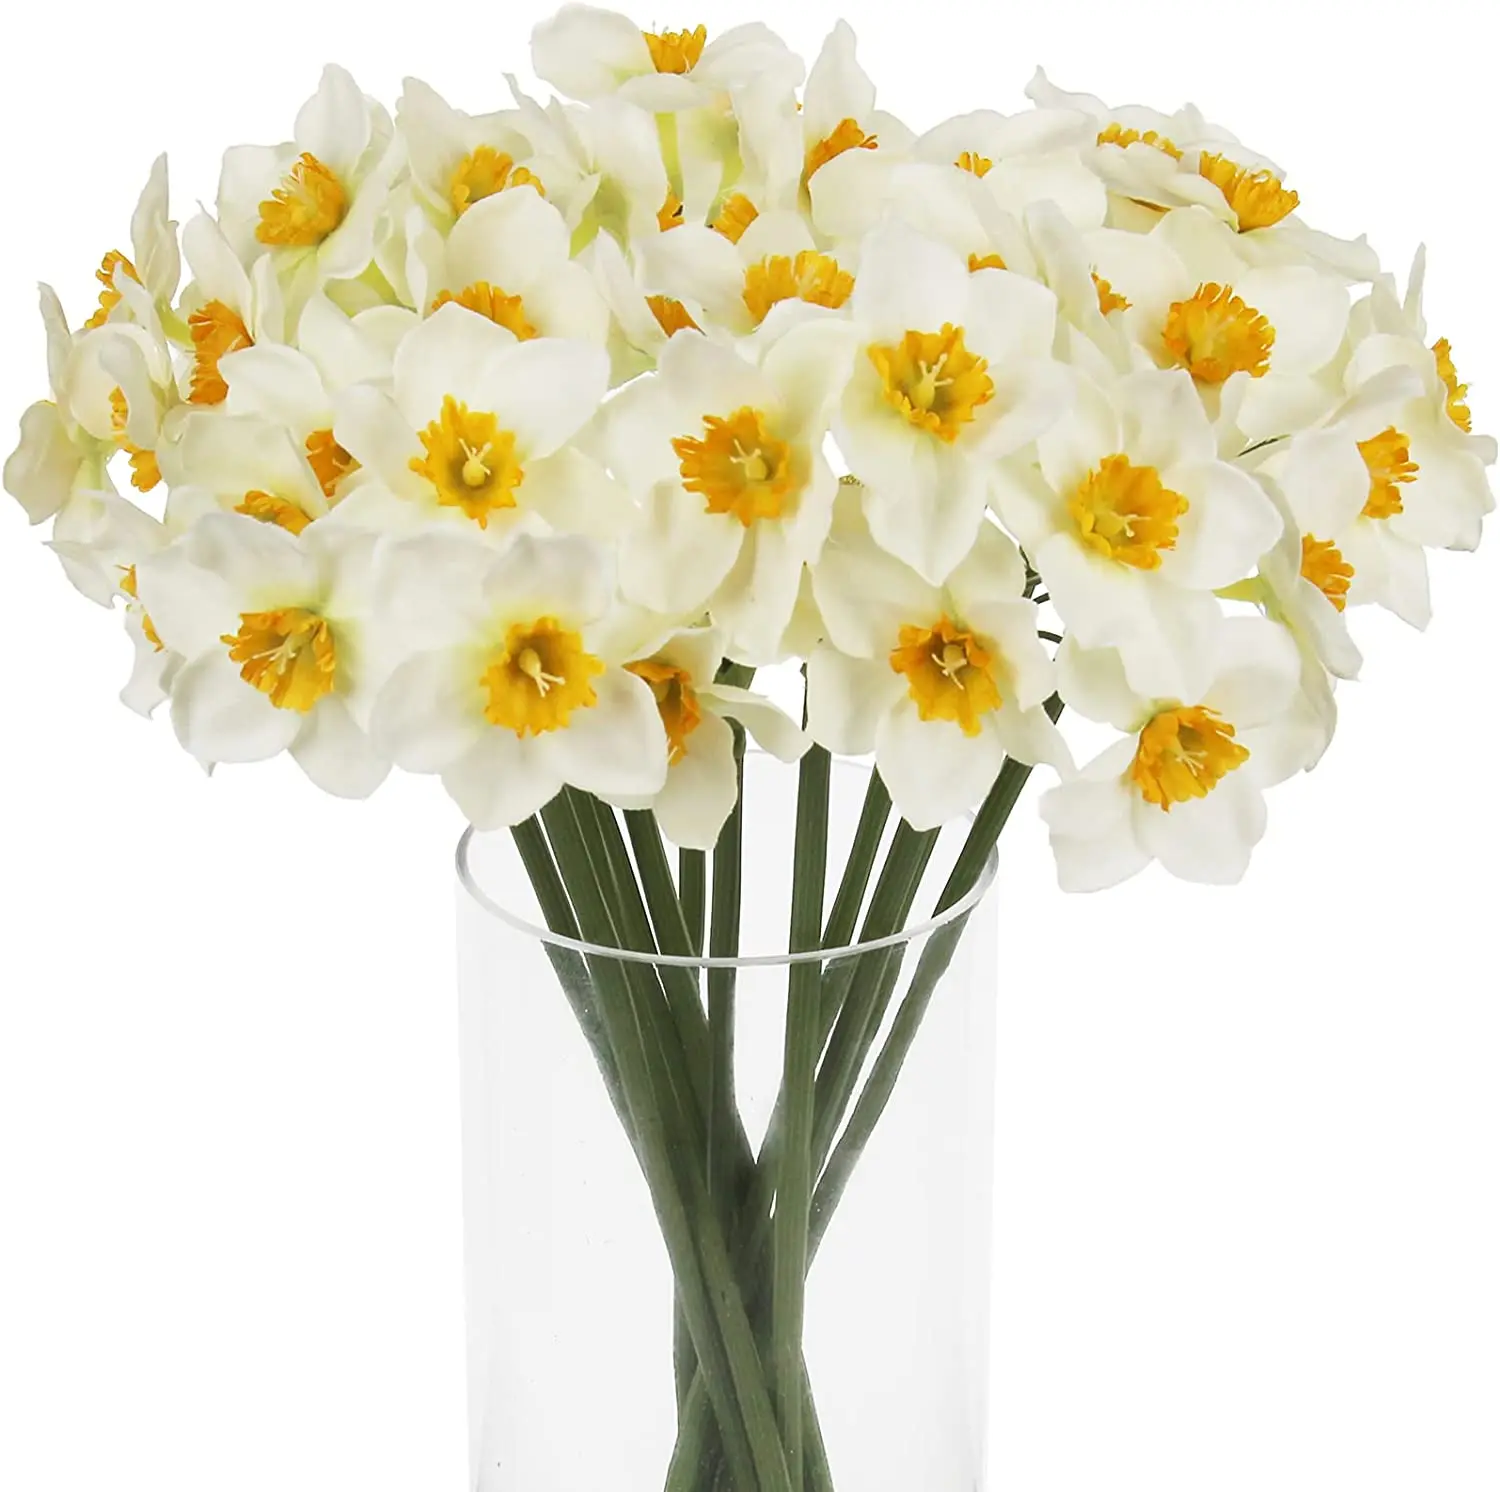 

Artificial Daffodil Flowers 15.8 Inches Narcissus Spring Flower Fake Silk Flower Arrangement for Home Wedding Decor (White, 12)